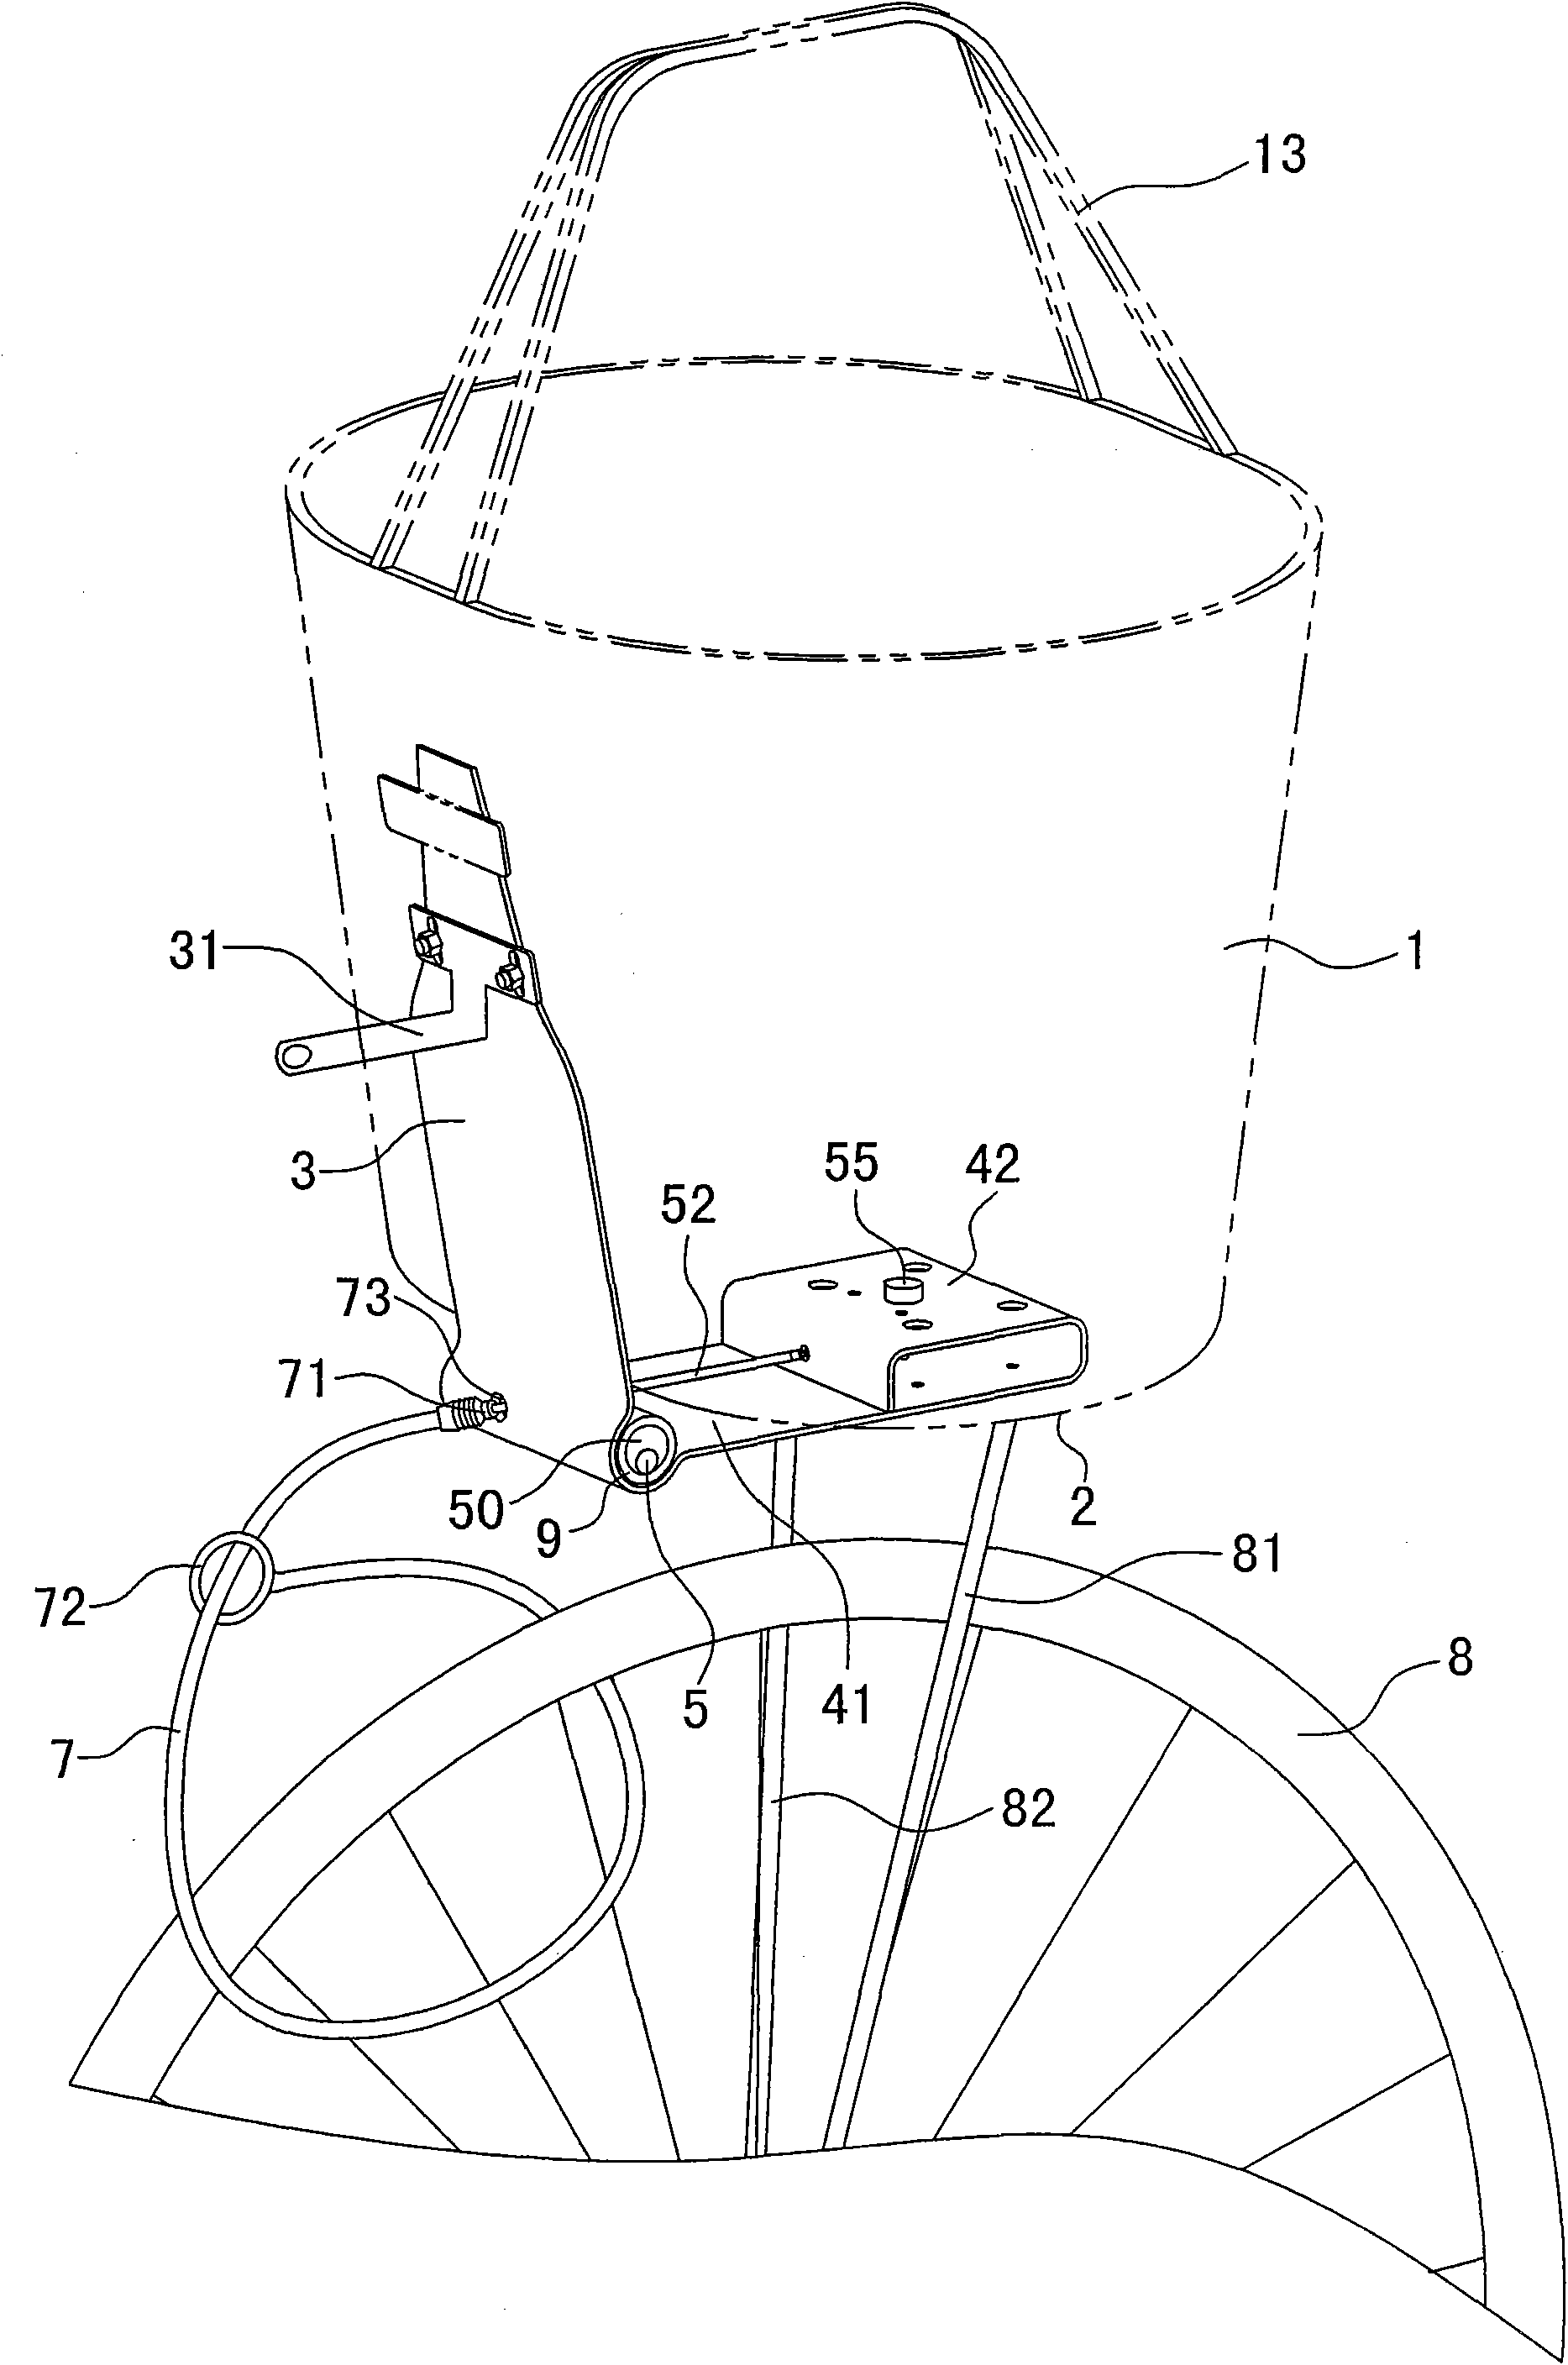 Locking mechanism for movable double-purpose bicycle basket